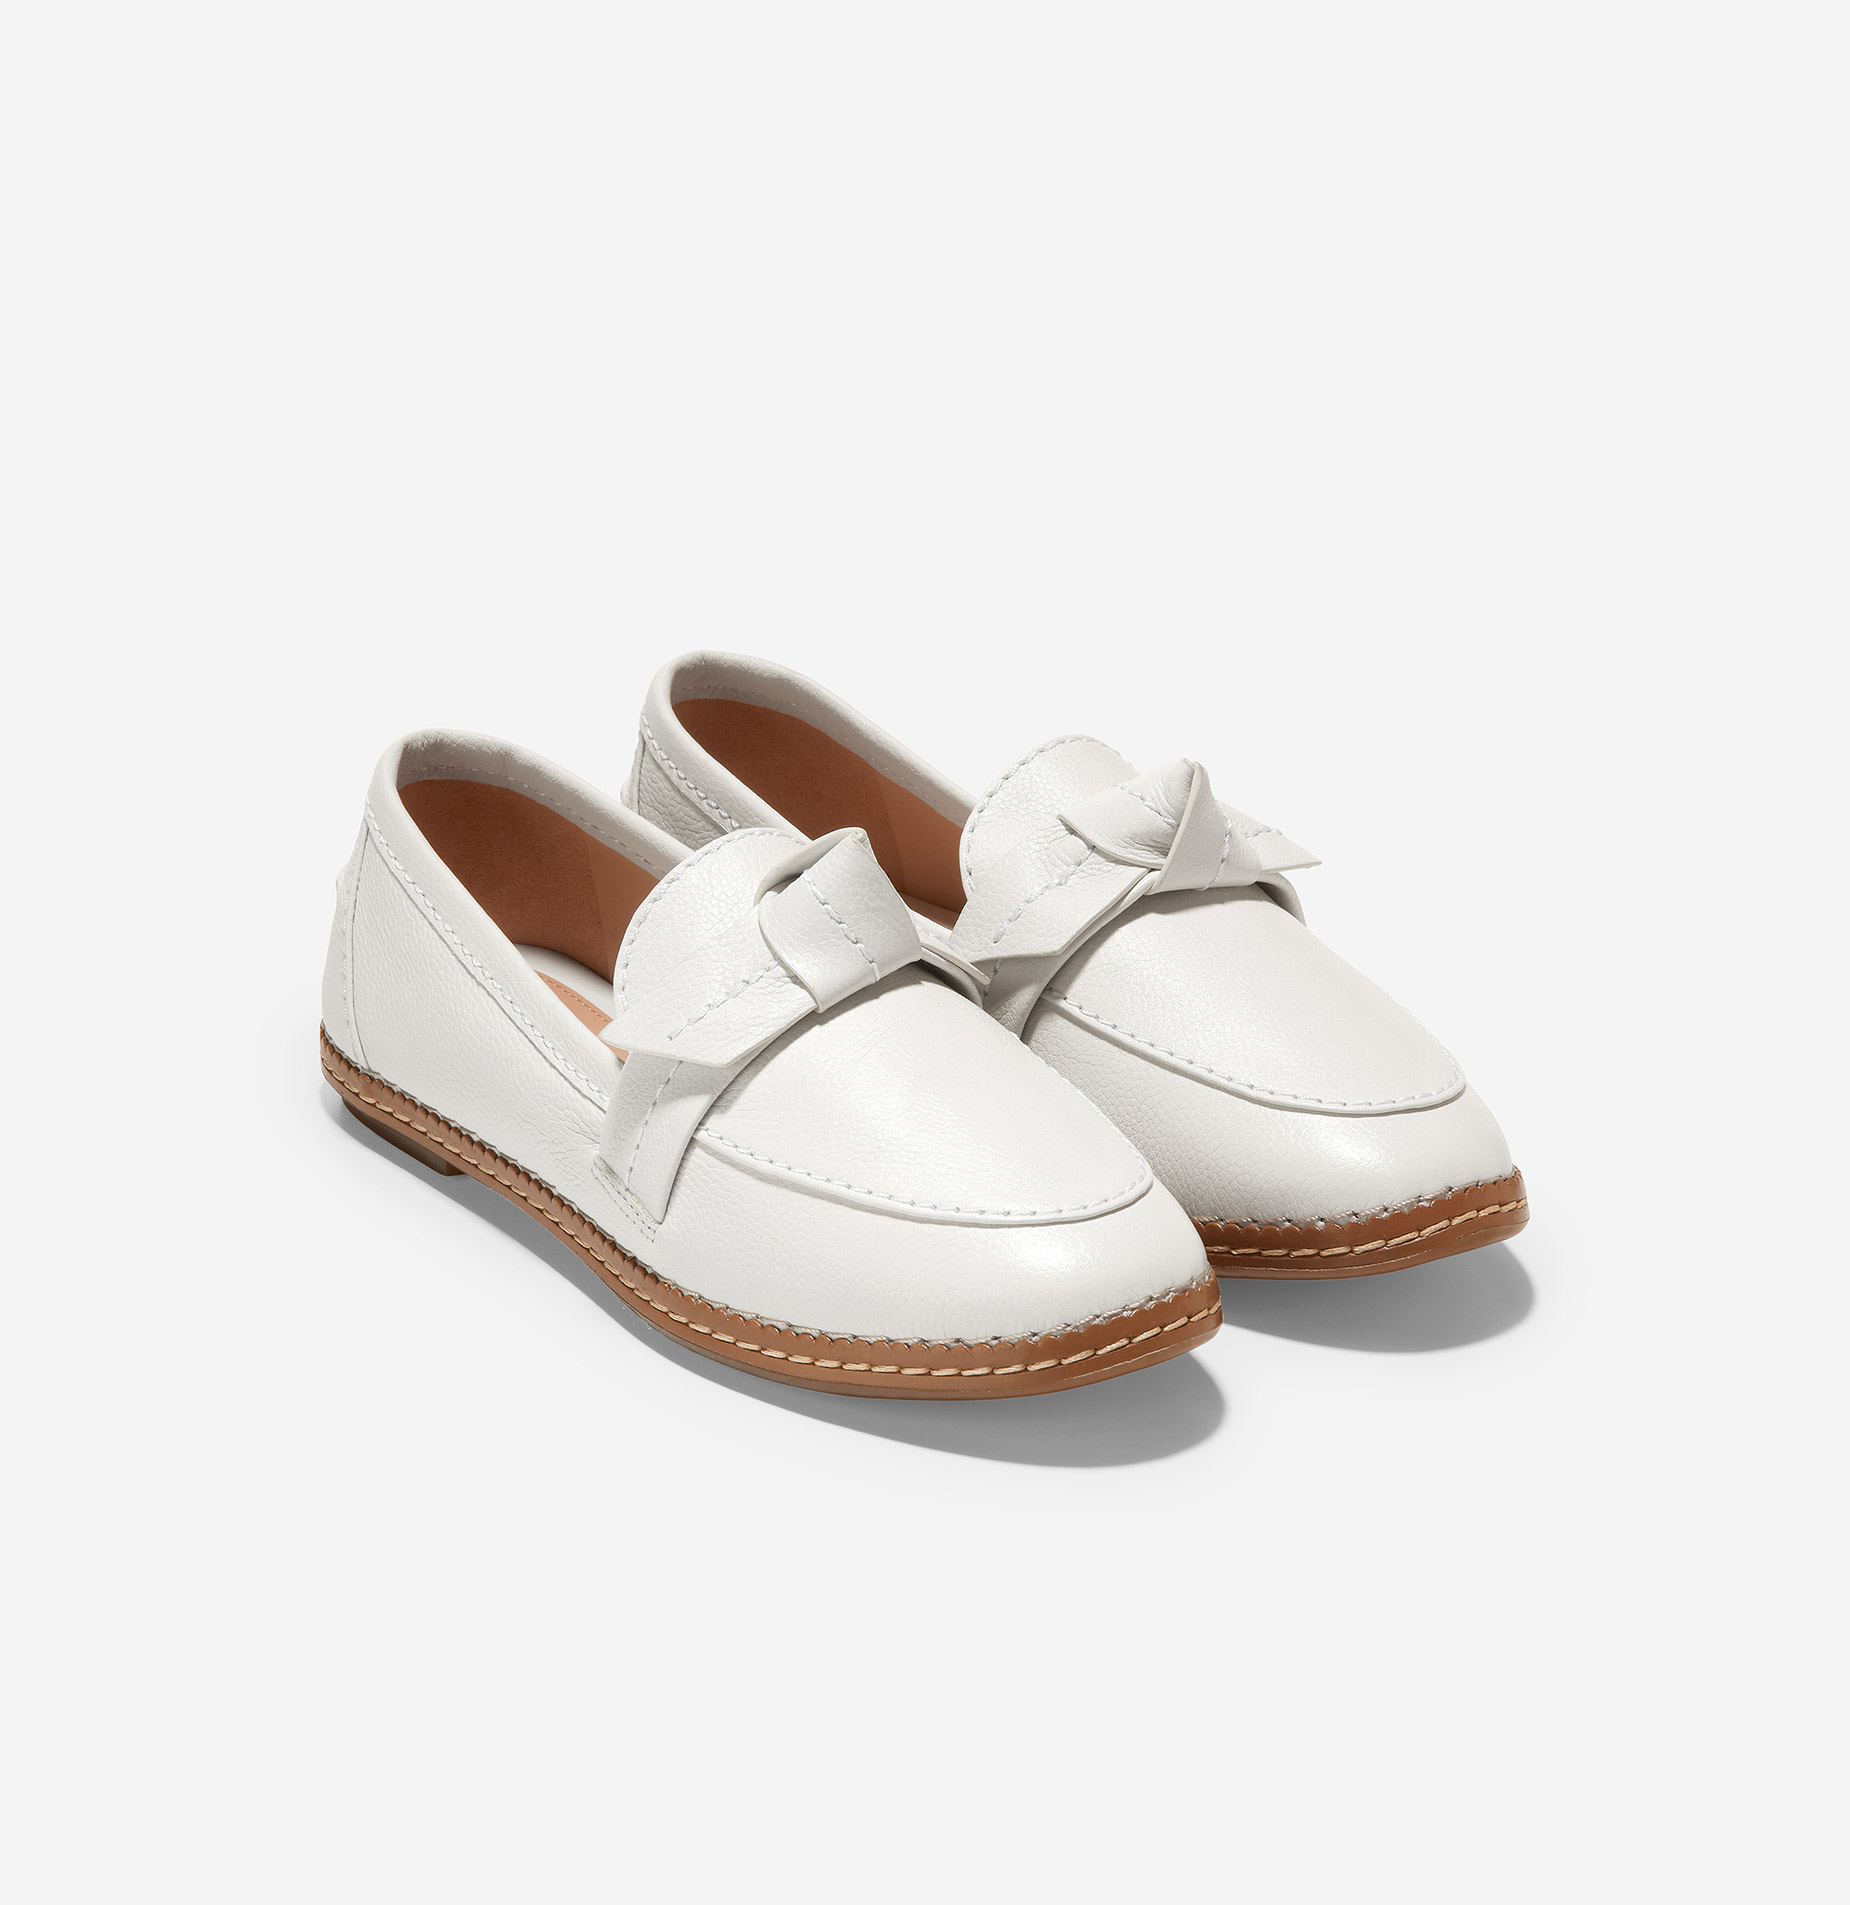 CLOUDFEEL ALL DAY BOW LOAFER